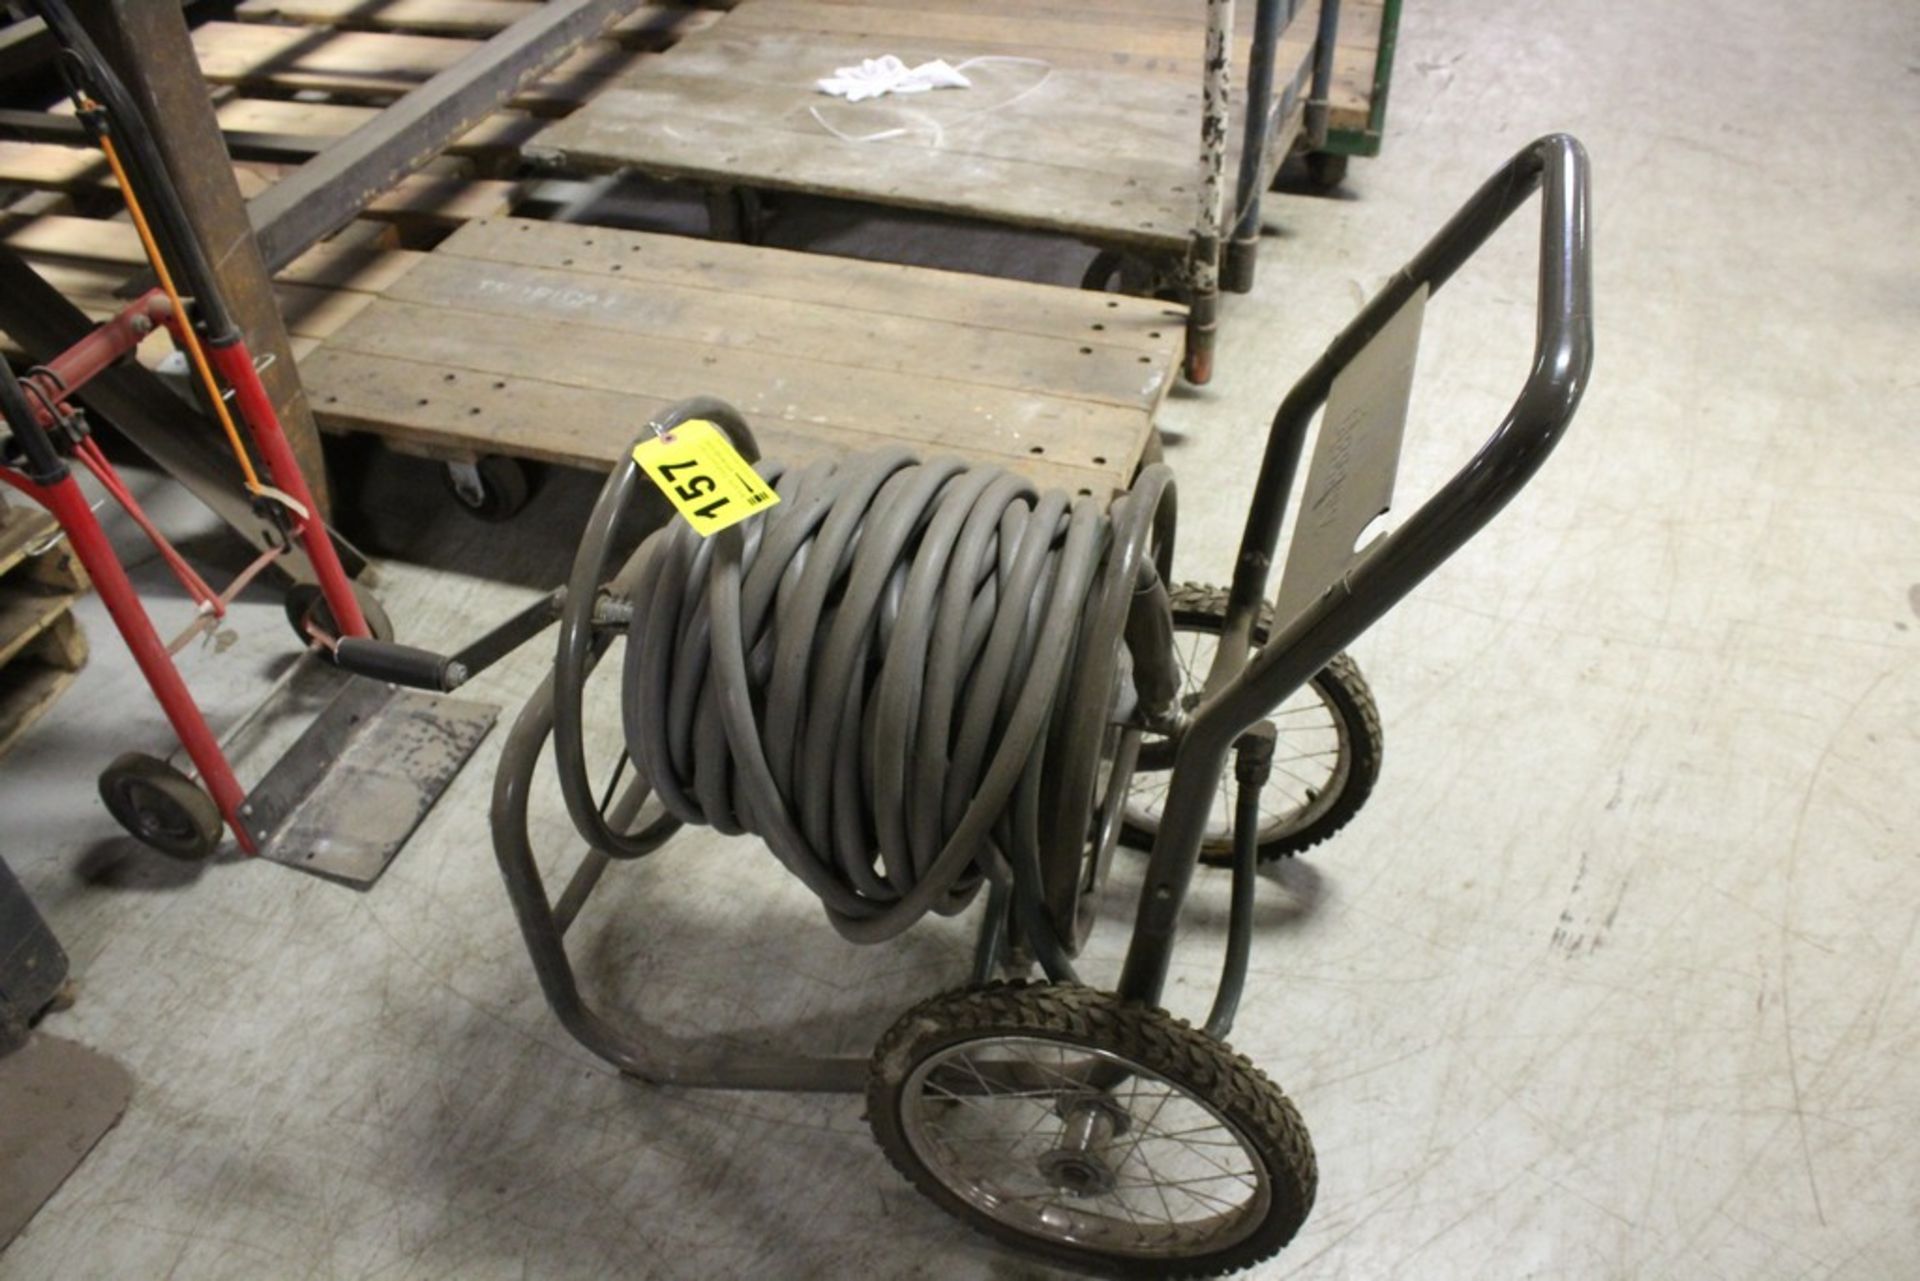 WATER HOSE ON PORTABLE REEL